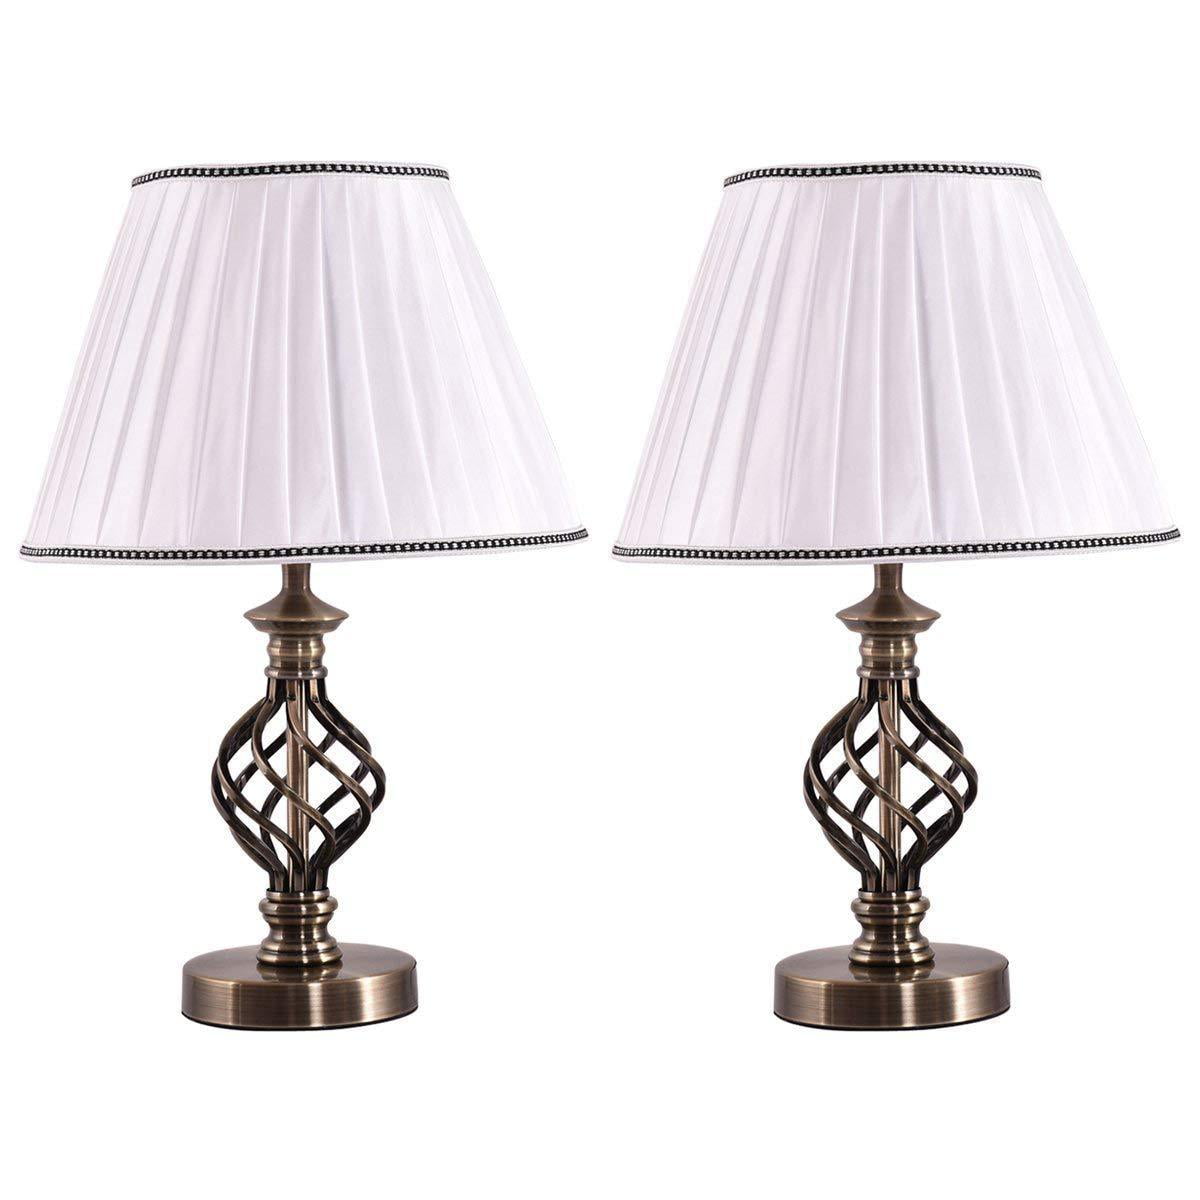 Set of 2 13" Antique Brass Bedside Table Lamp w/ LED Bulb Office ...